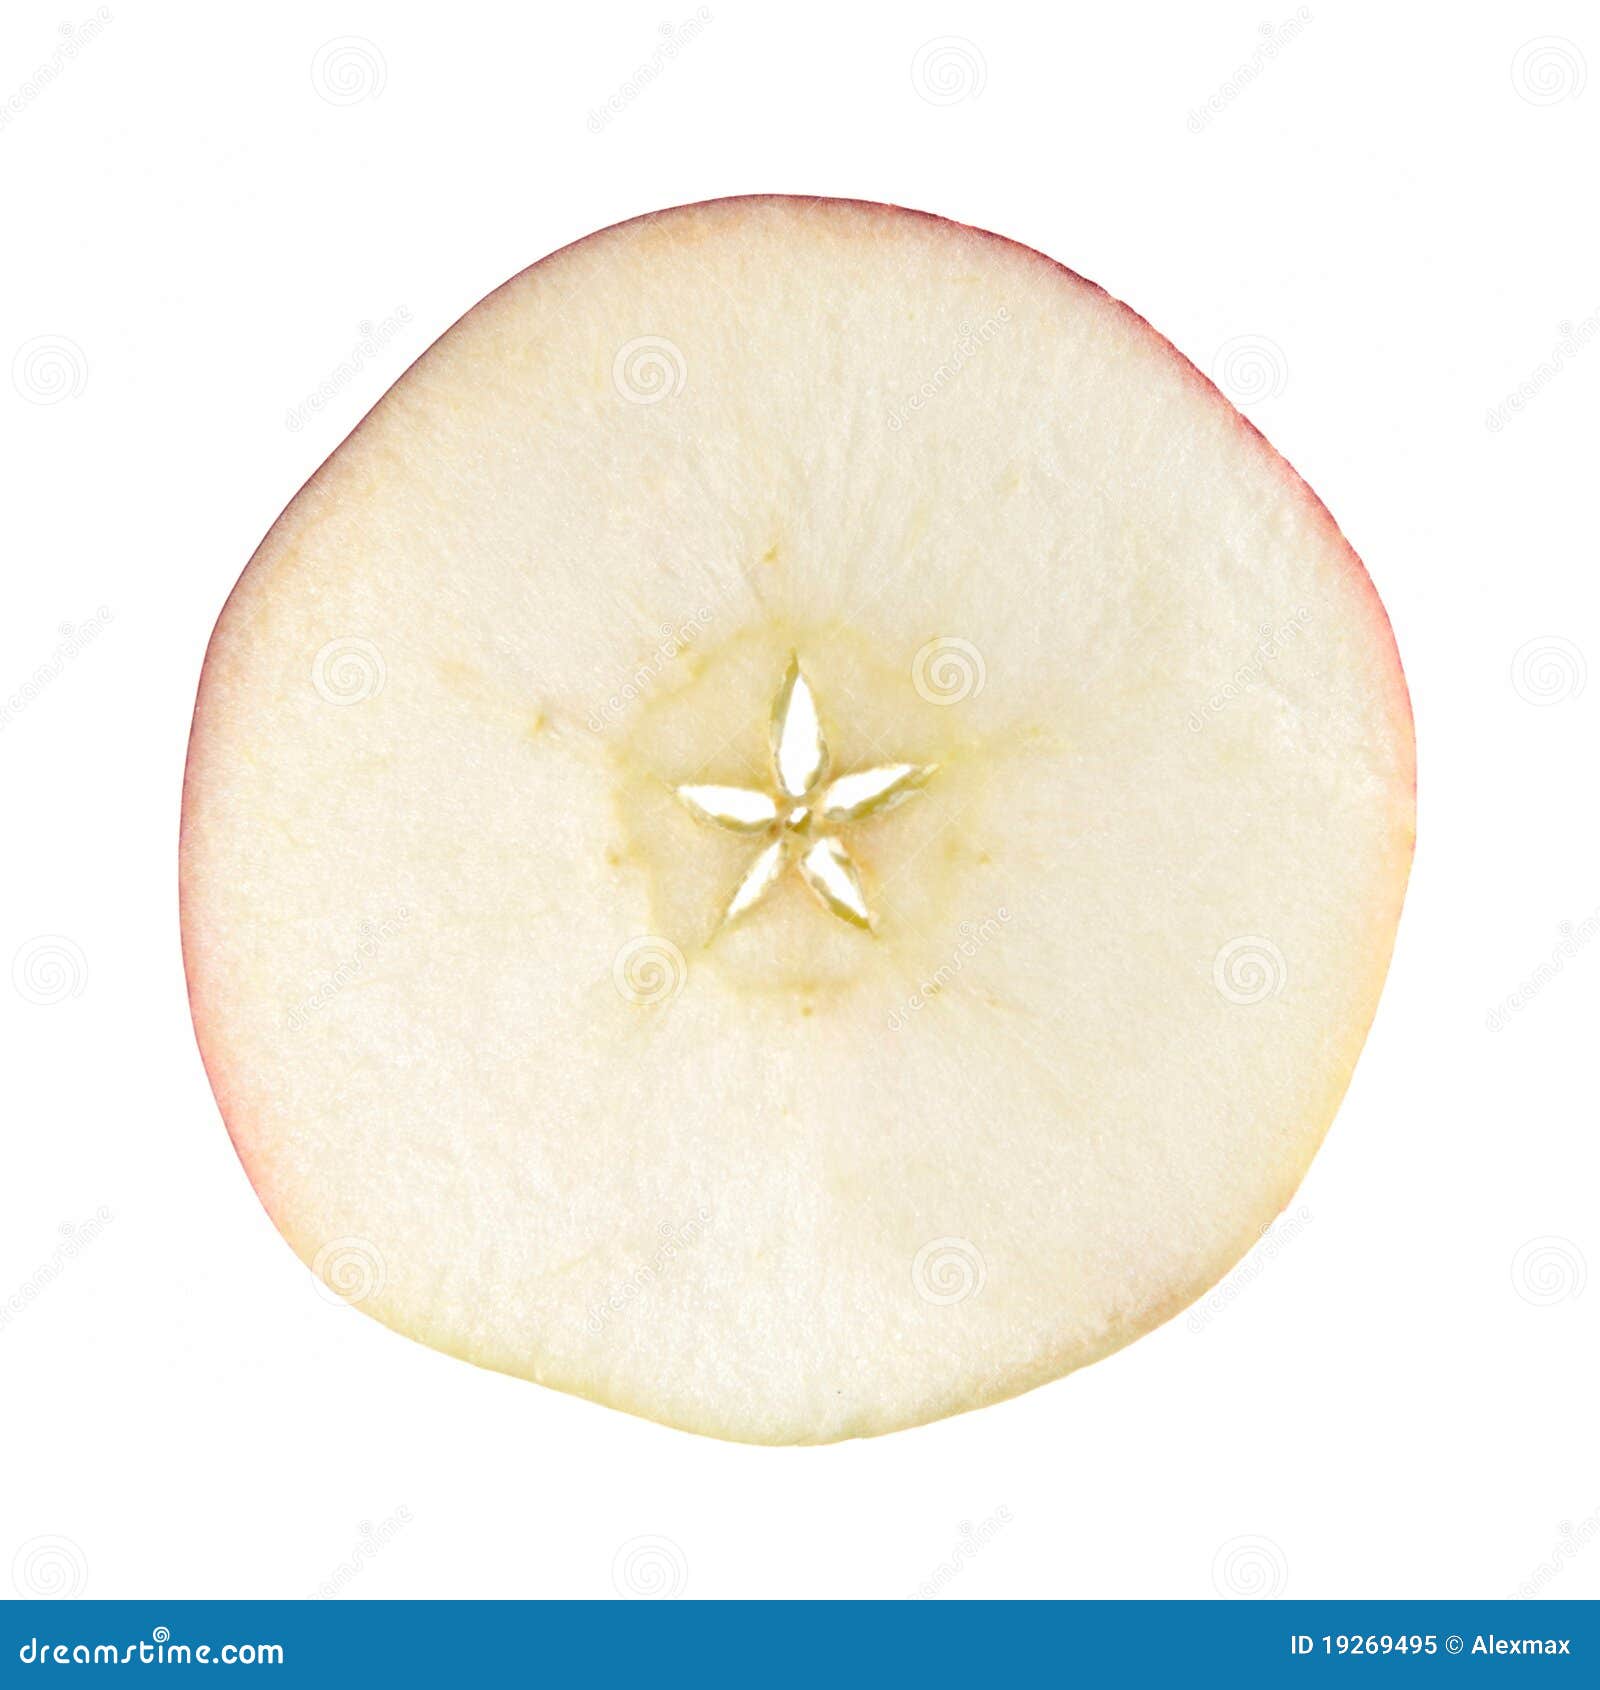 Slice of Apple stock image. Image of slices, food, texture - 19269495